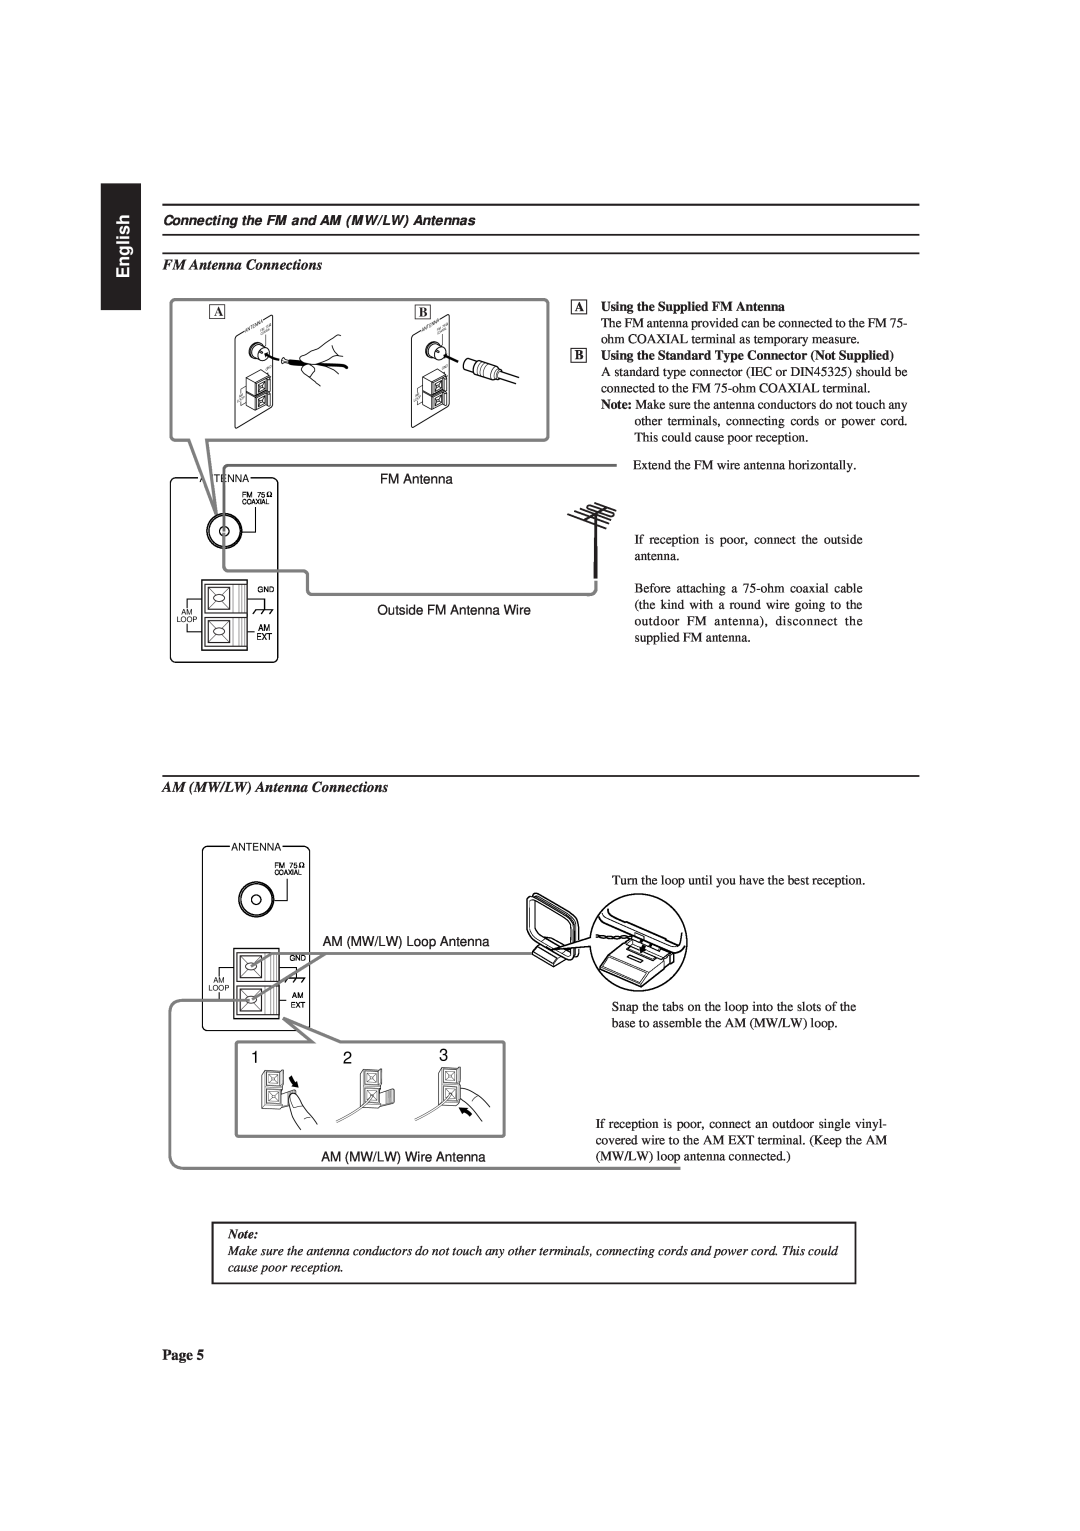 JVC RX-630RBK manual Connecting the FM and AM MW/LW Antennas, FM Antenna Connections, AM MW/LW Antenna Connections, English 